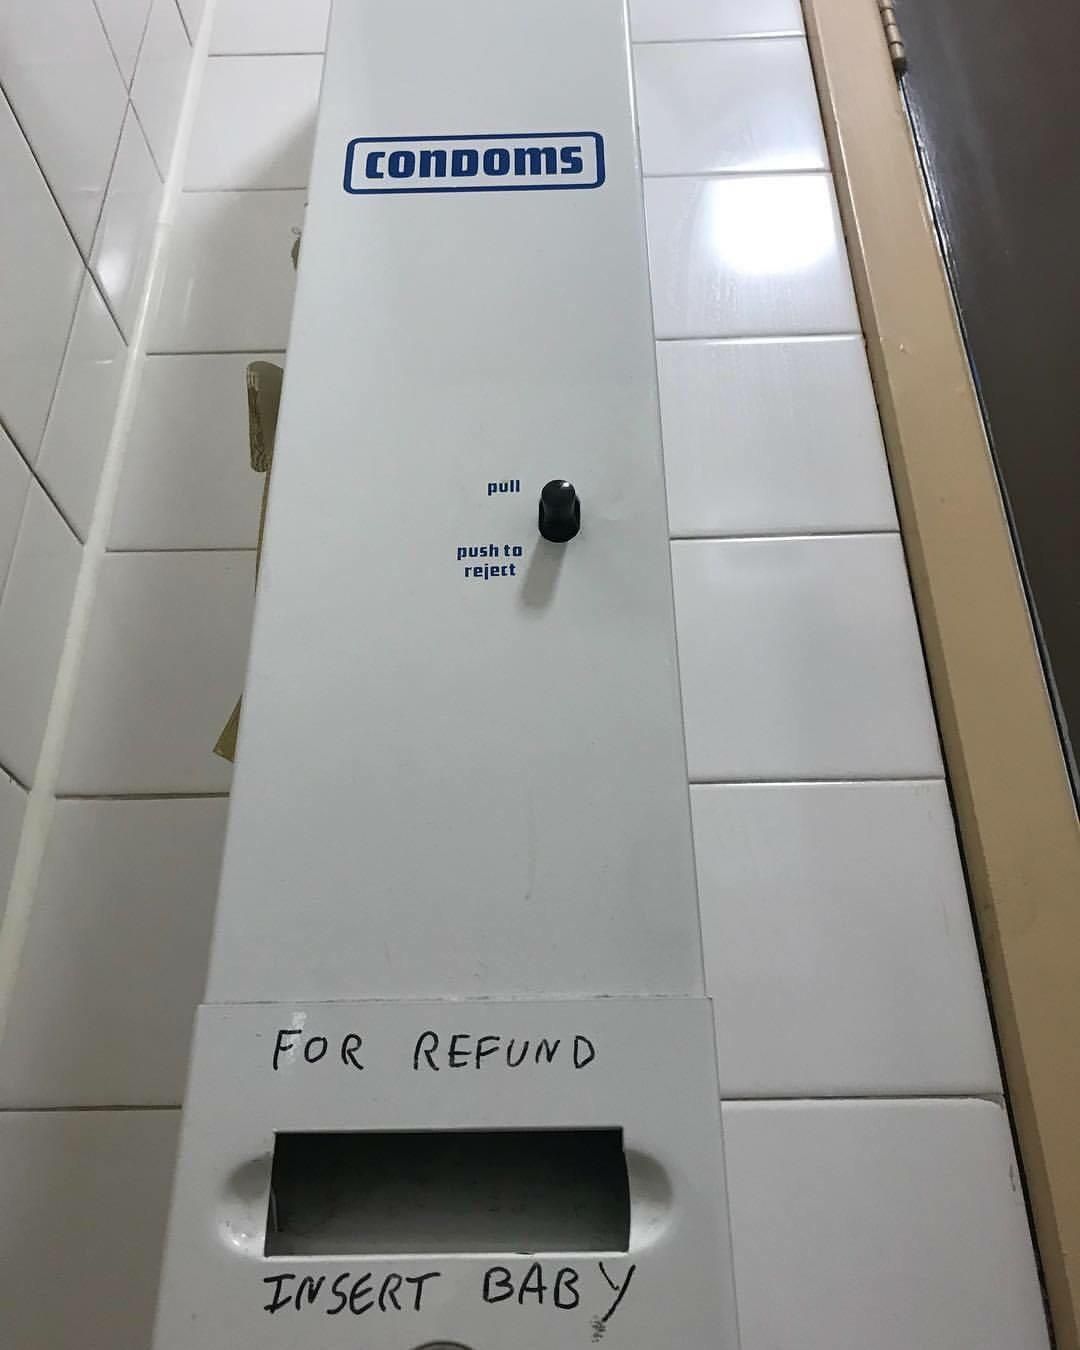 Condom machines are now offering refunds...